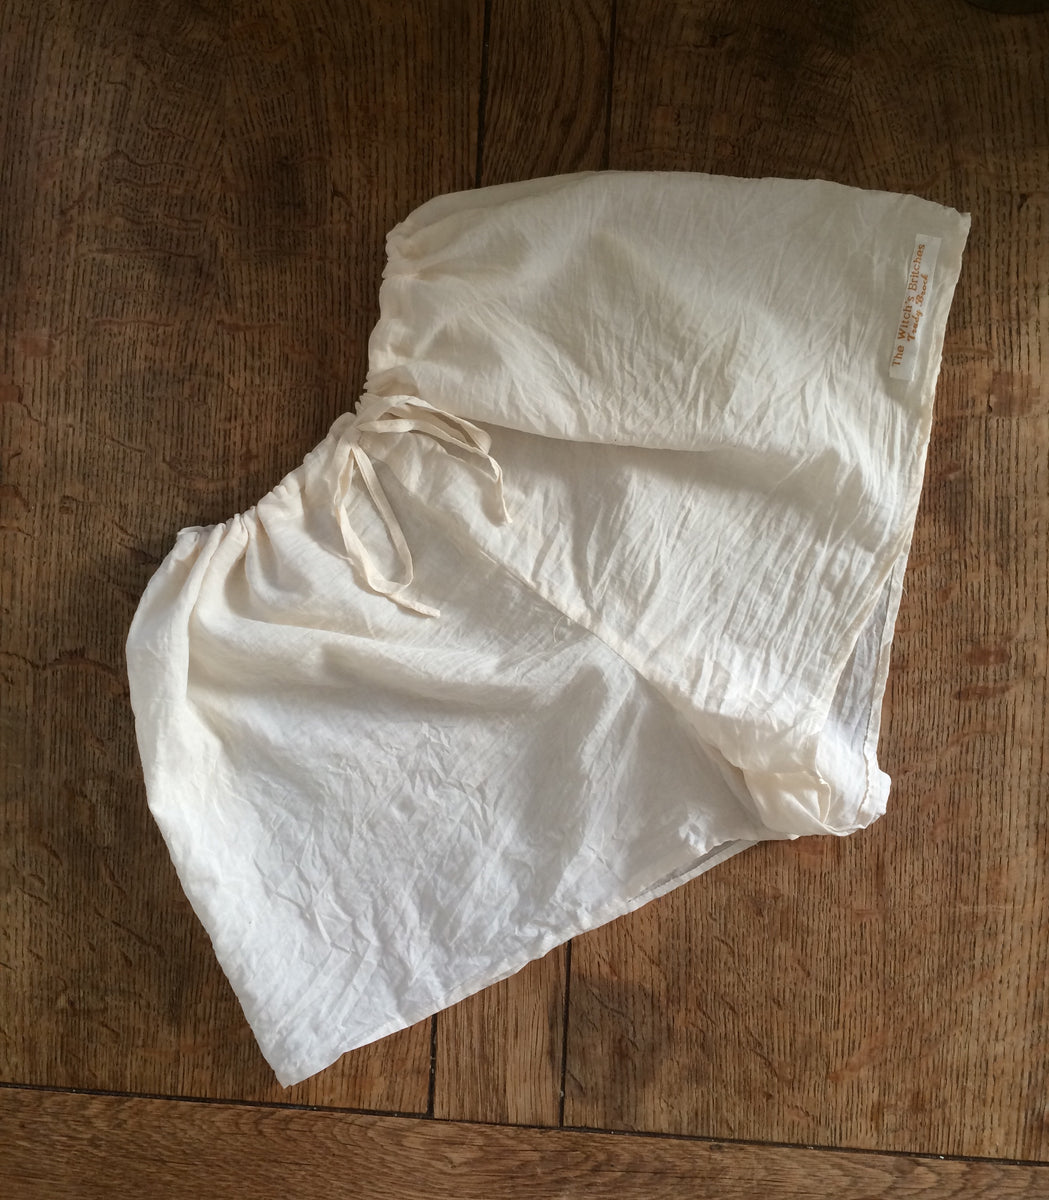 Organic Cotton French Knickers - The Birch Store